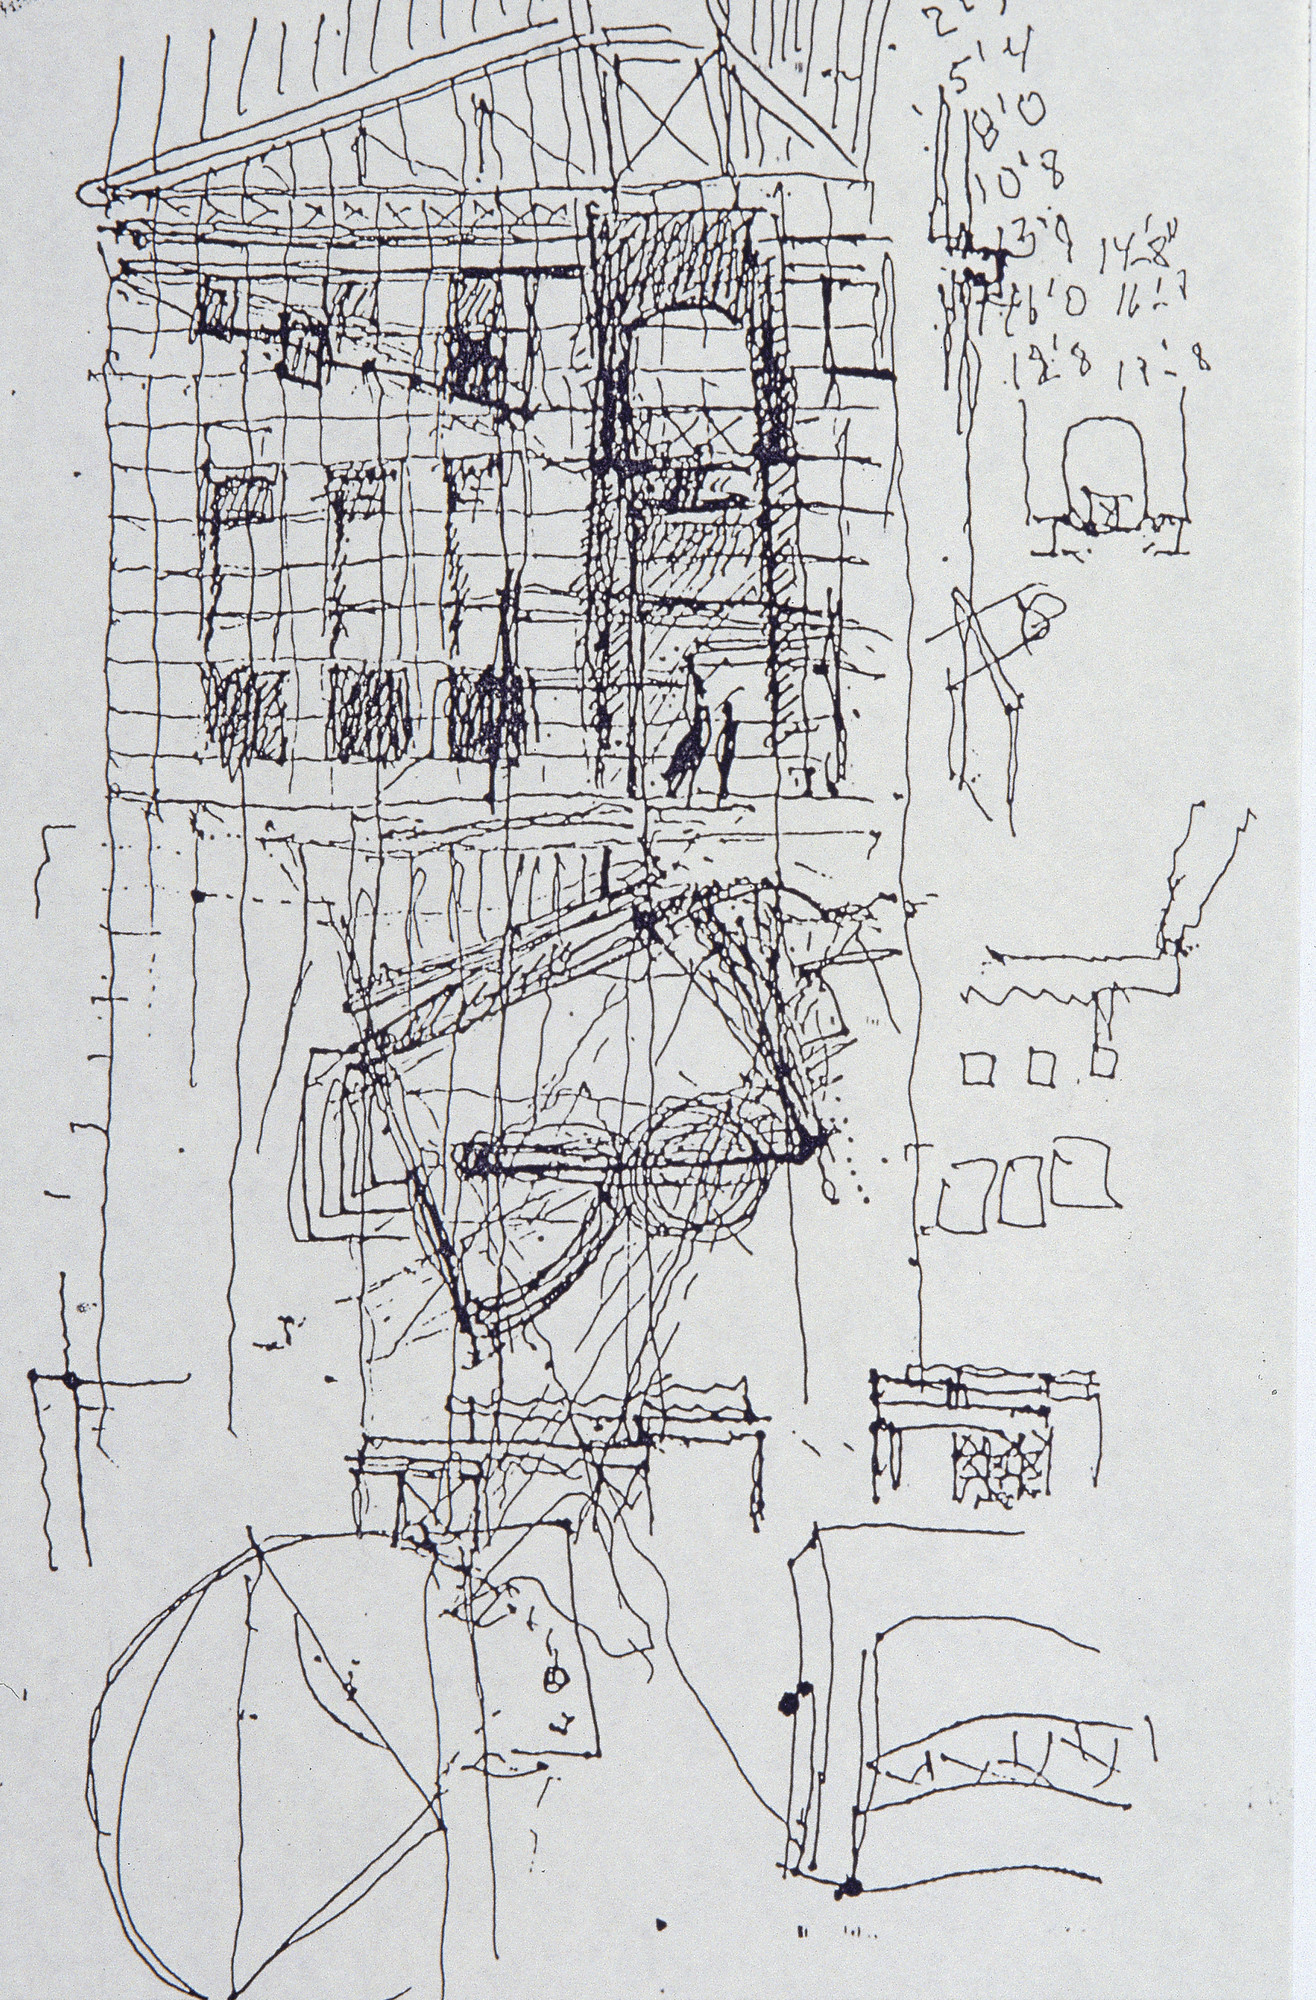 Sketch of the U.S. Holocaust Memorial Museum building by the museum's architect, James Ingo Freed.